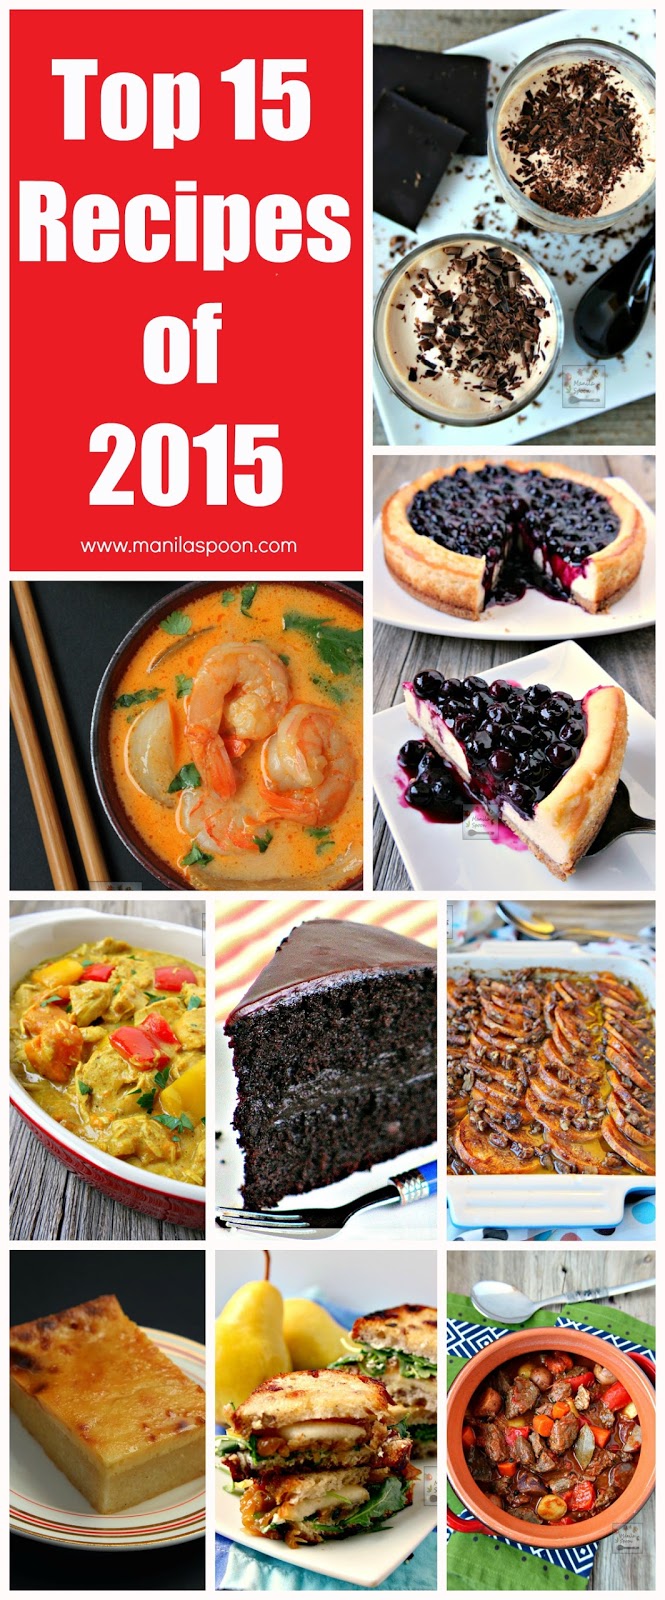 A round-up of our most popular, most pinned and most viewed recipes of 2015! A variety of tried and tested, sweet and savory dishes that the whole family can enjoy throughout the years to come! | manilaspoon.com